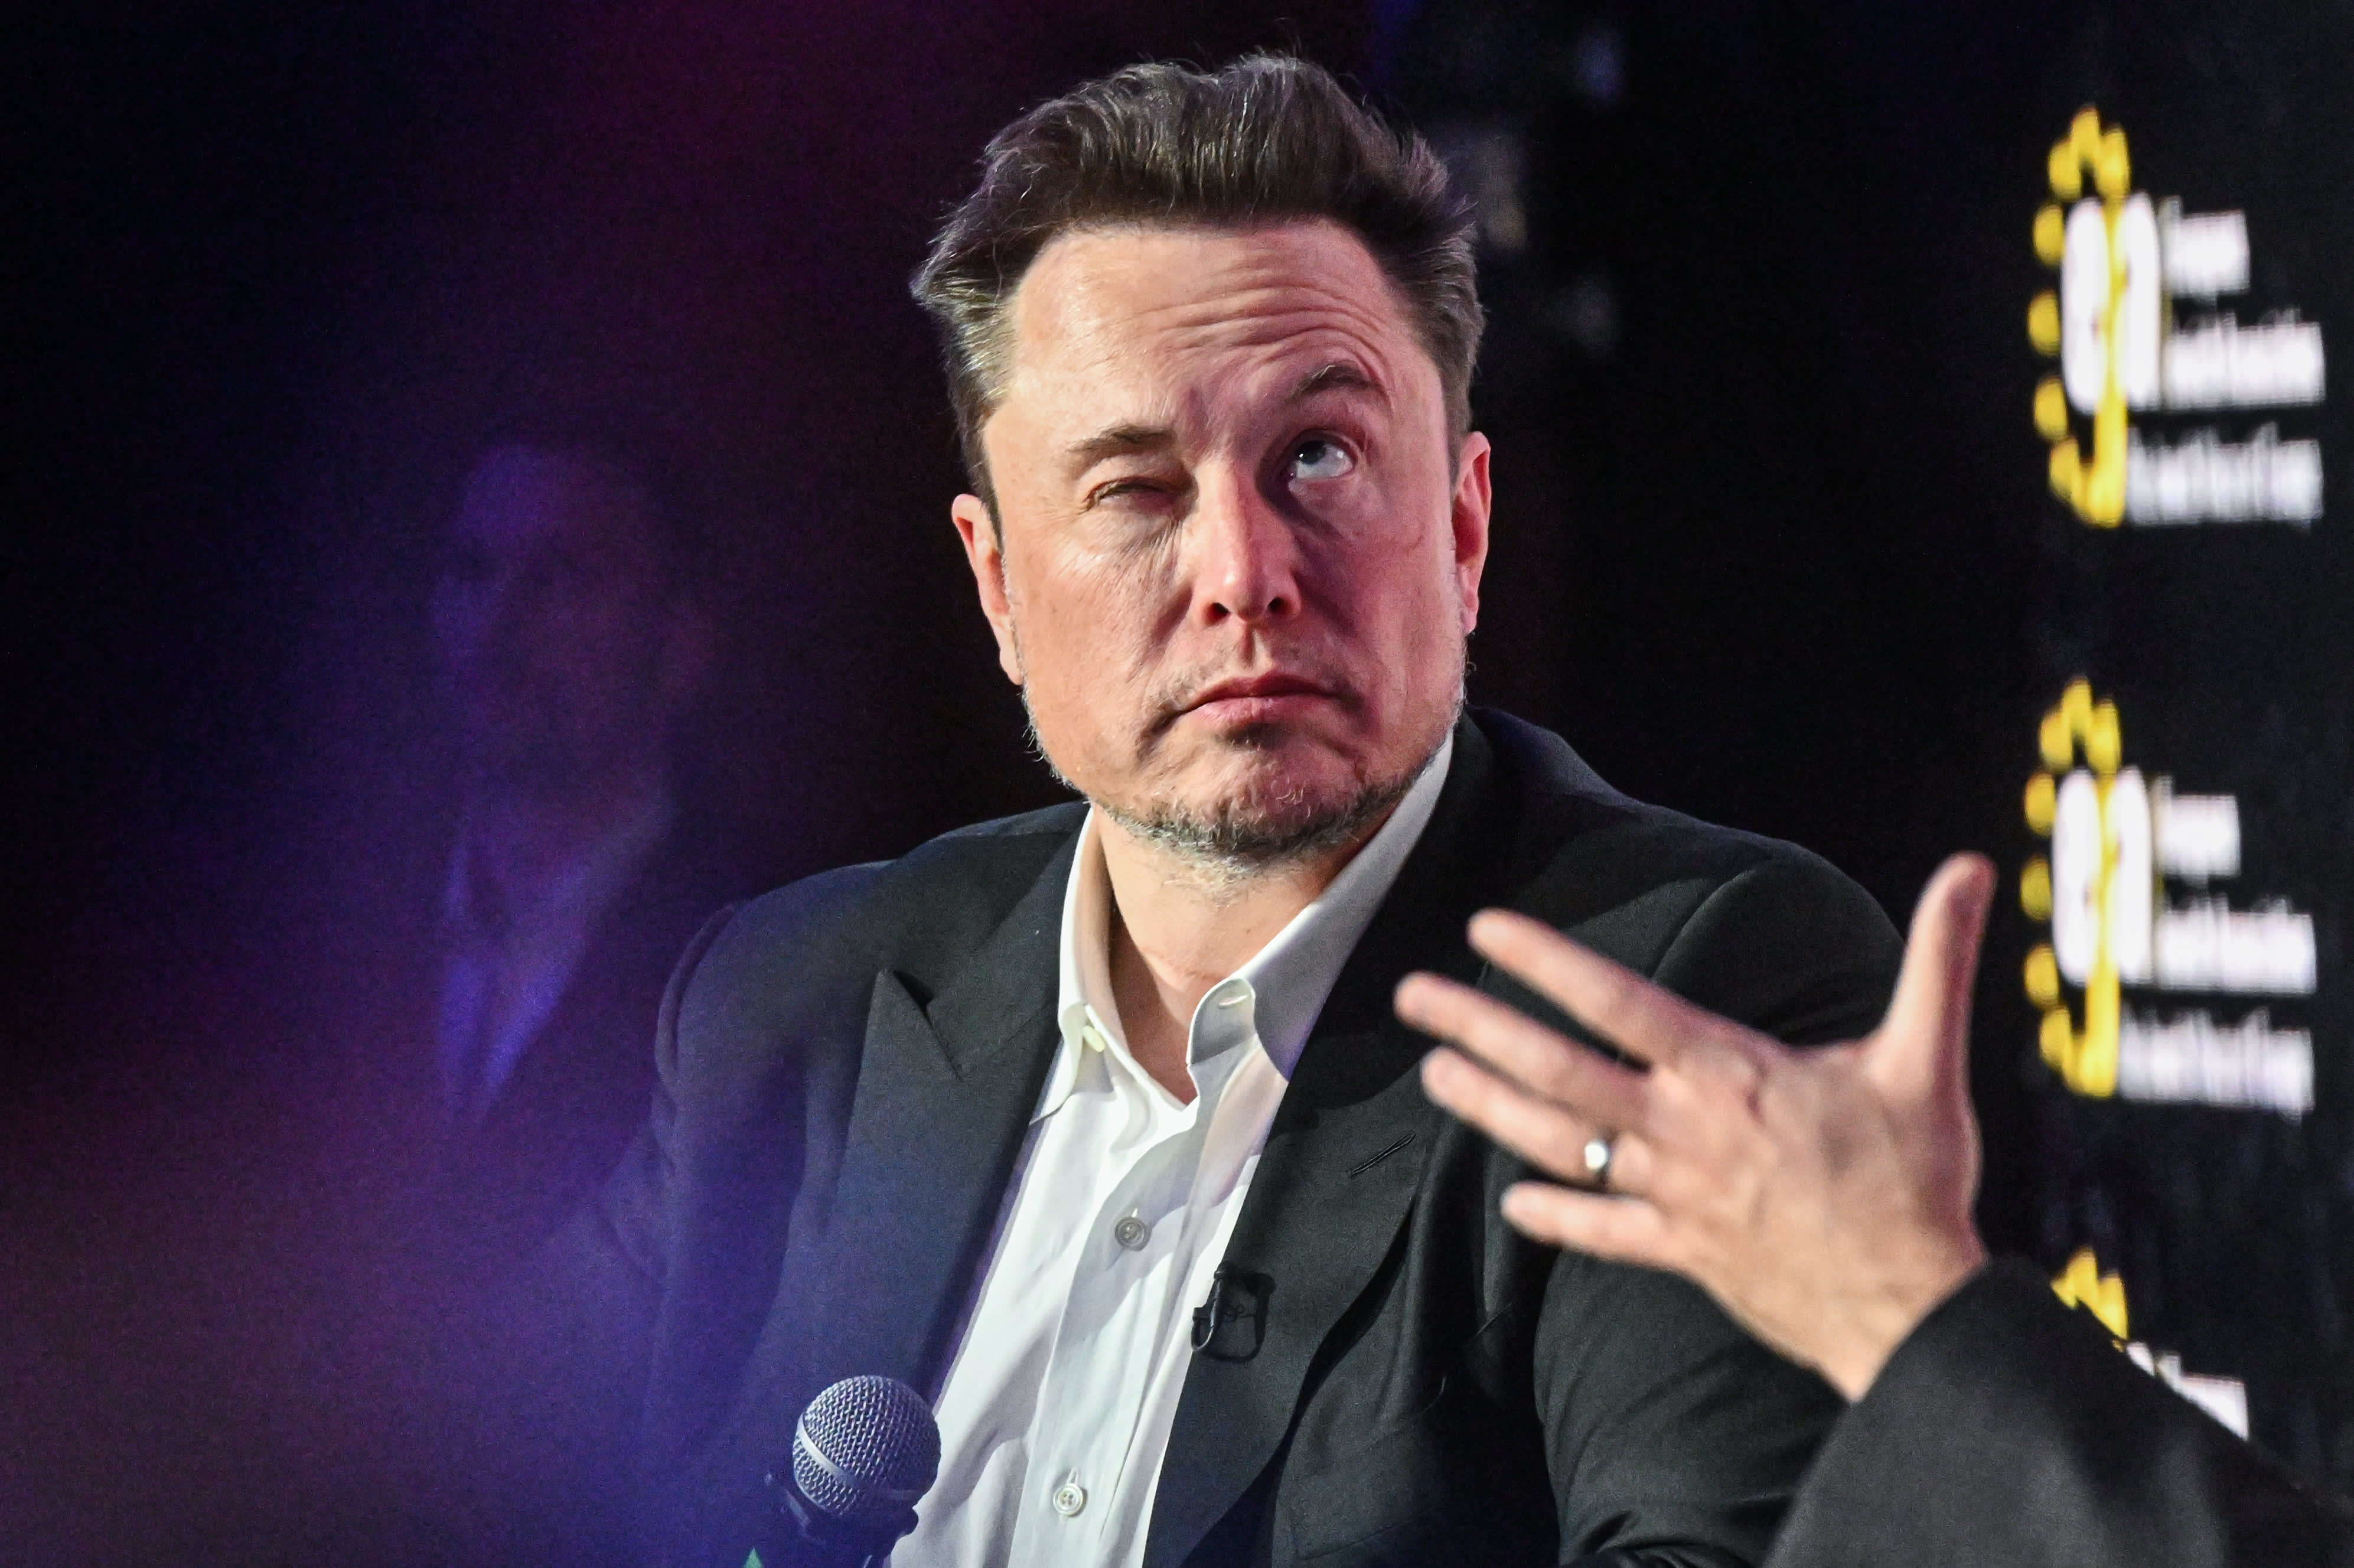 Elon Musk is ordered to testify in the SEC’s Twitter investigation